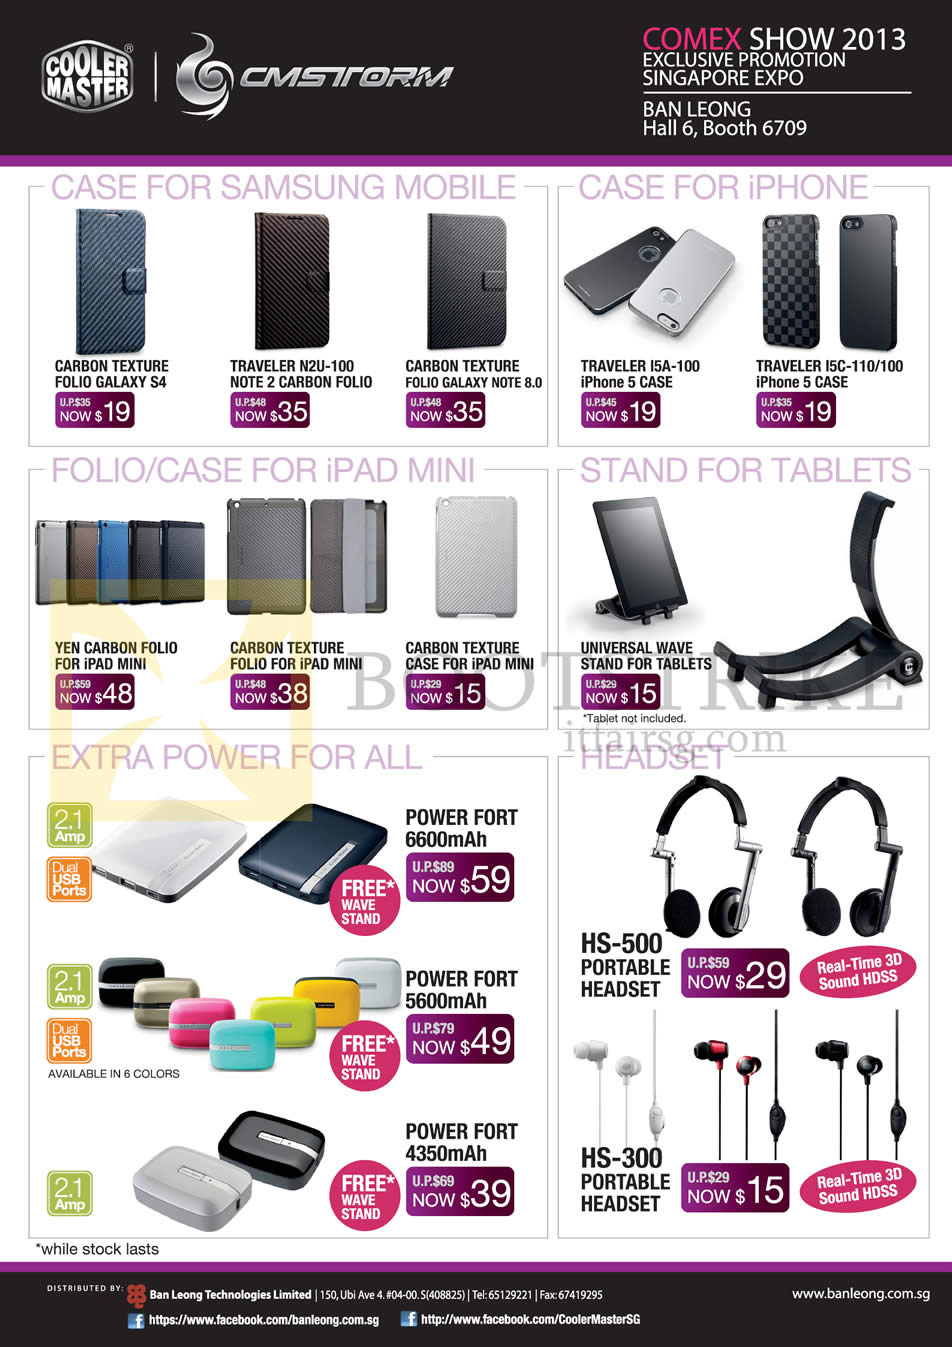 COMEX 2013 price list image brochure of Cooler Master CMStorm Ban Leong Case, Folio IPhone, IPad Mini, Tablets, External Charger Power Fort, Headsets HS-500 HS-300